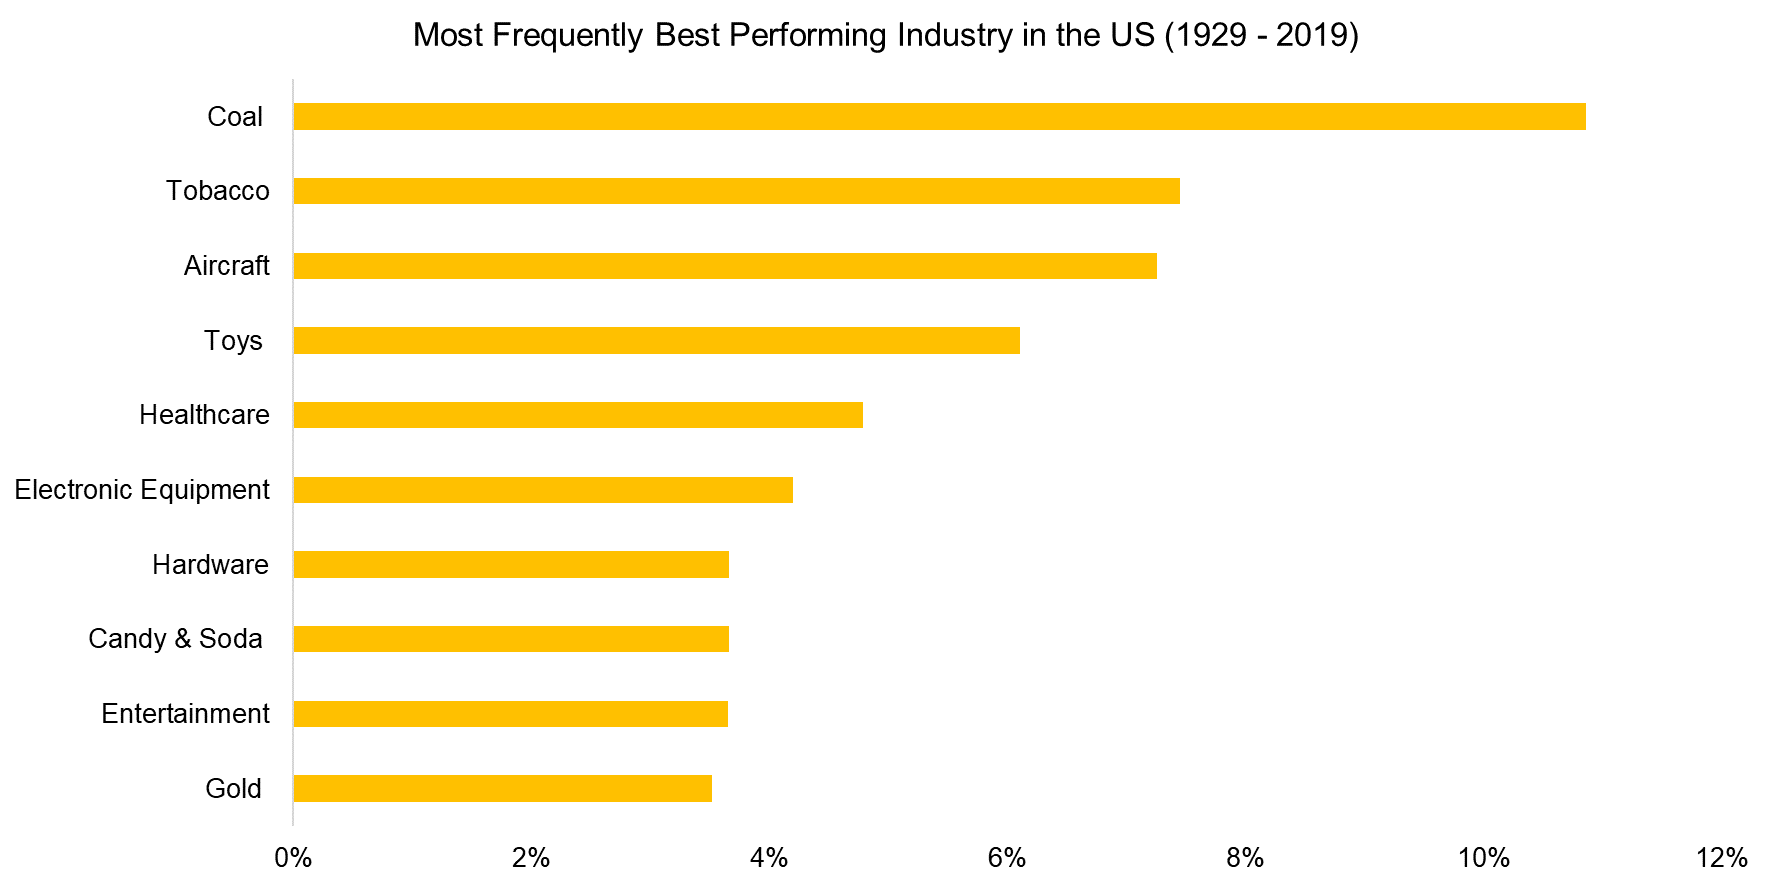 Most Frequently Best Performing Industry in the US (1929 - 2019)